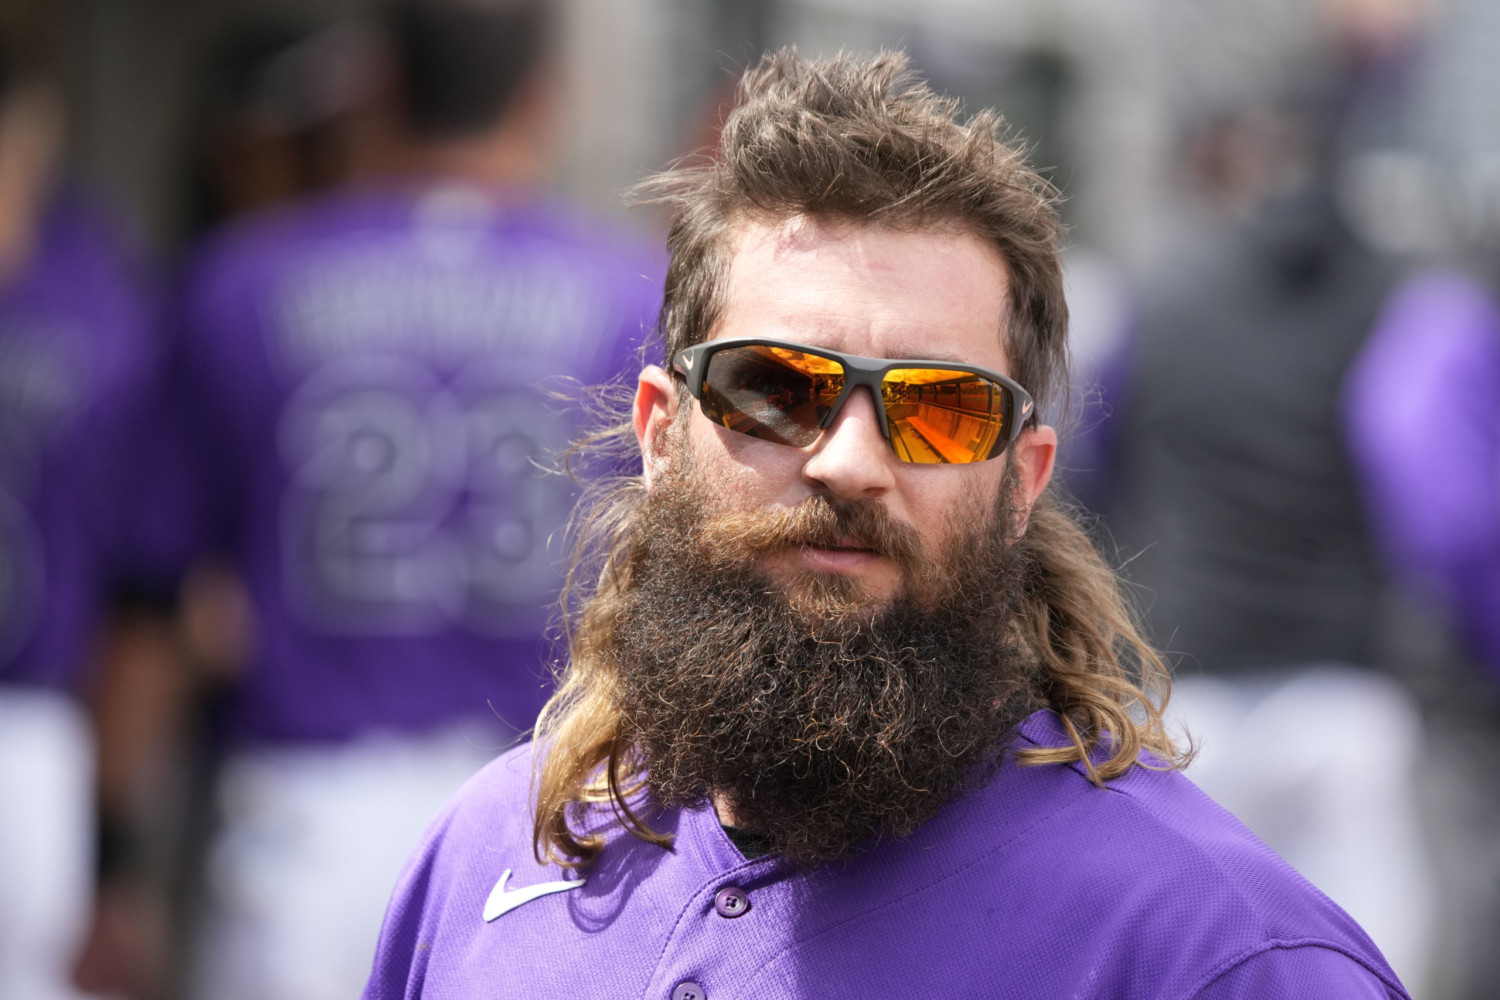 Charlie Blackmon Is First Active MLB Player With Sportsbook Partnership